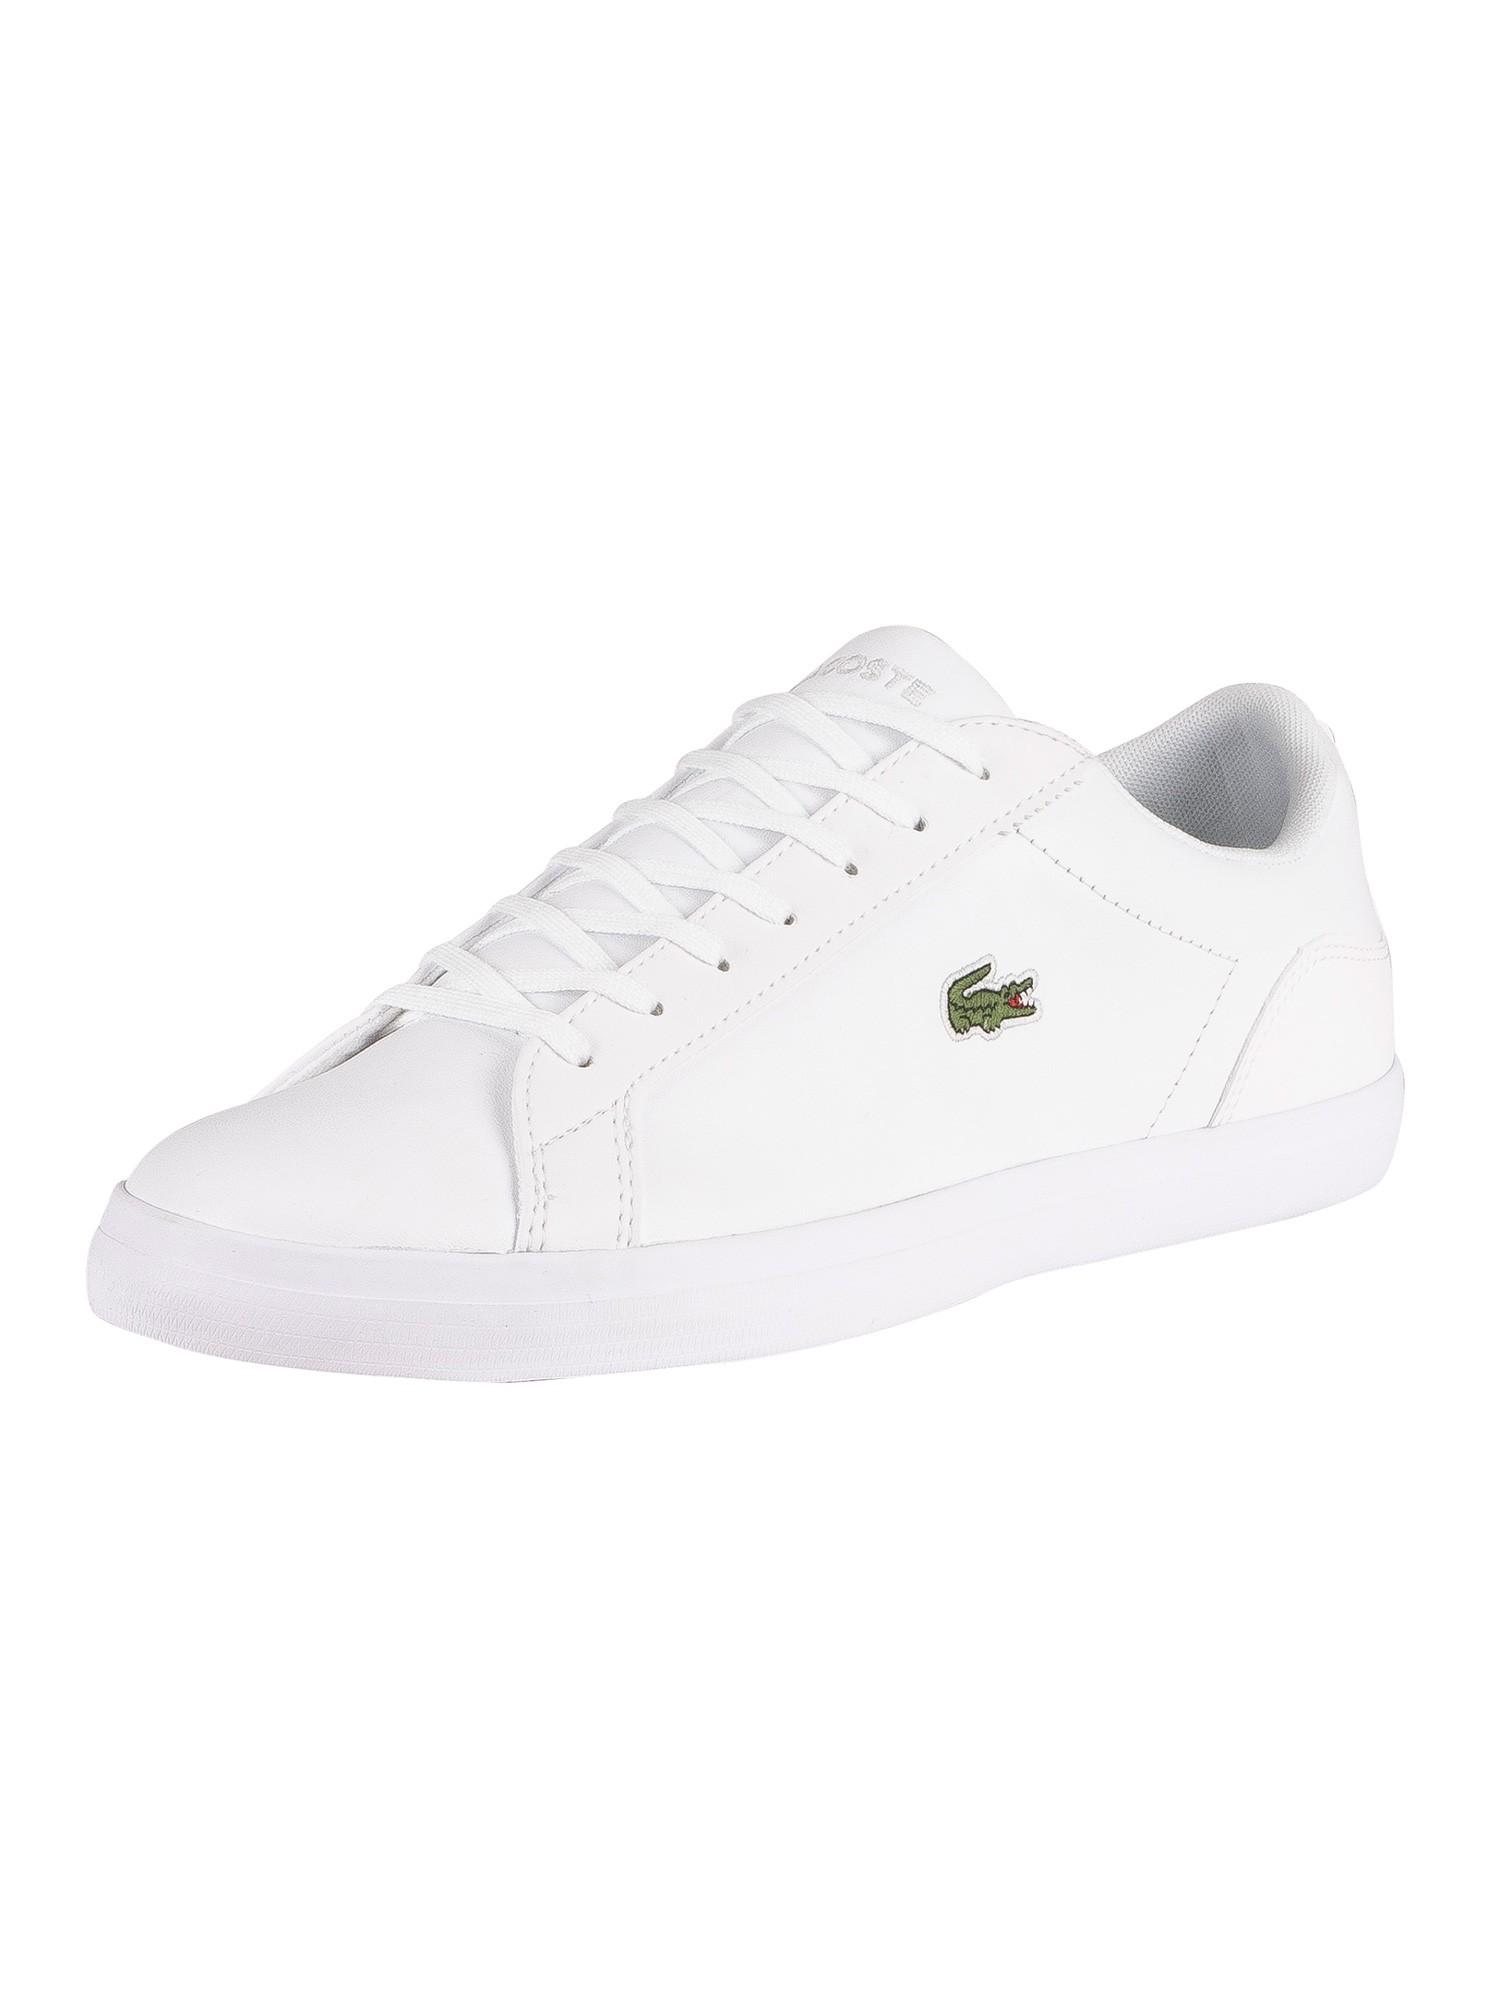 Lacoste Lerond Bl21 1 Cma Leather Trainers In White For Men Lyst